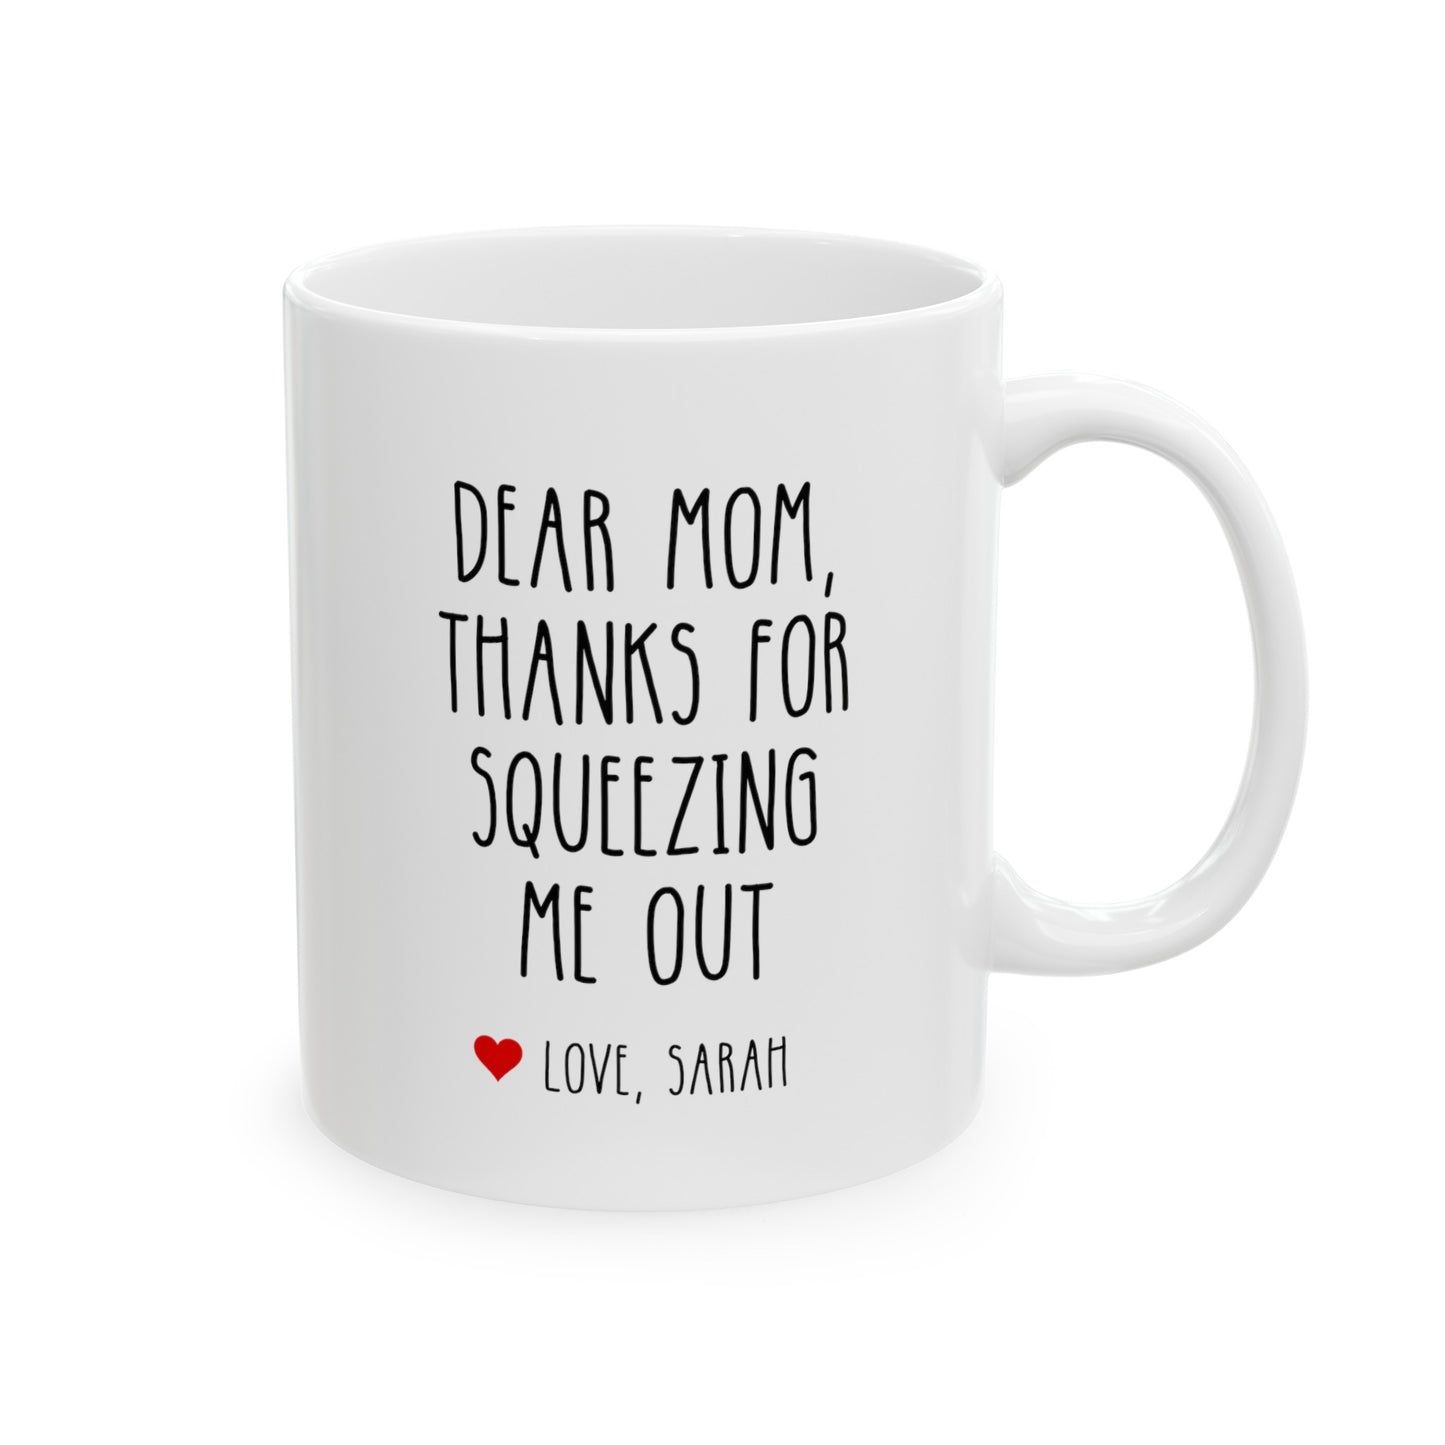 Dear Mom Thanks For Squeezing Me Out 11oz white funny large coffee mug gift for mother's day custom name personalize love novelty birthday appreciation gag waveywares wavey wares wavywares wavy wares